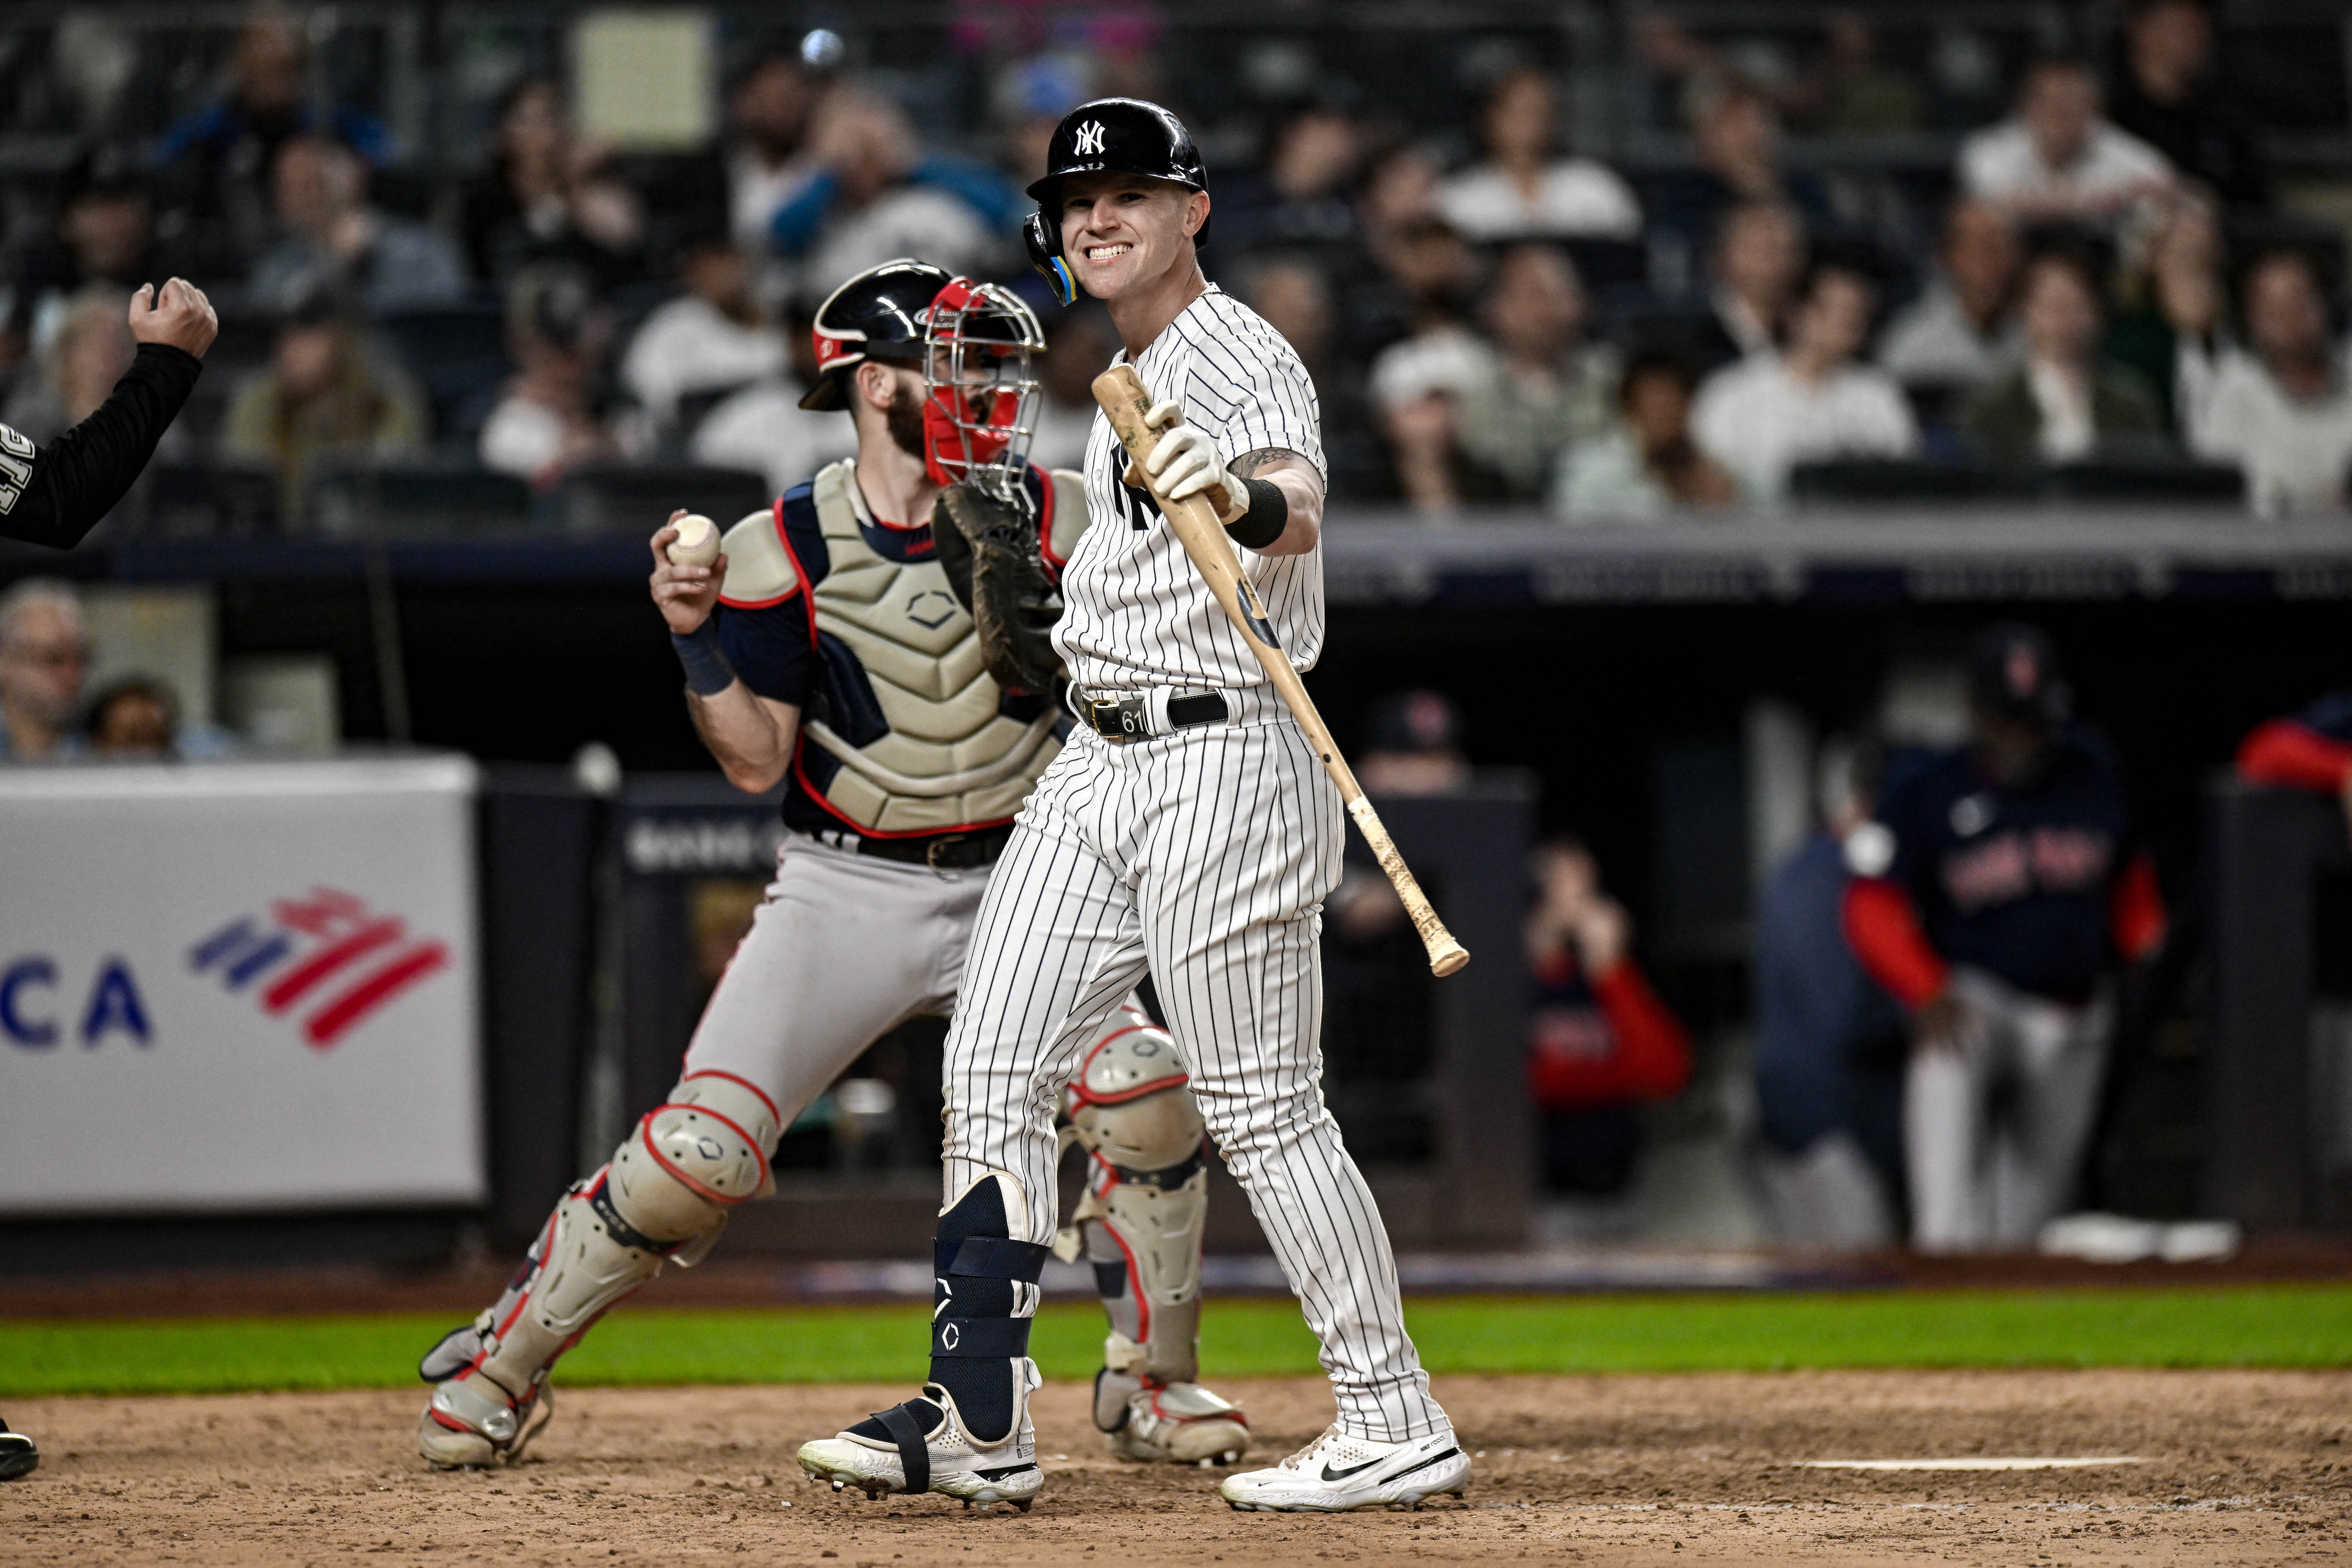 Red Sox edge Yankees in rivals' first meeting of 2023